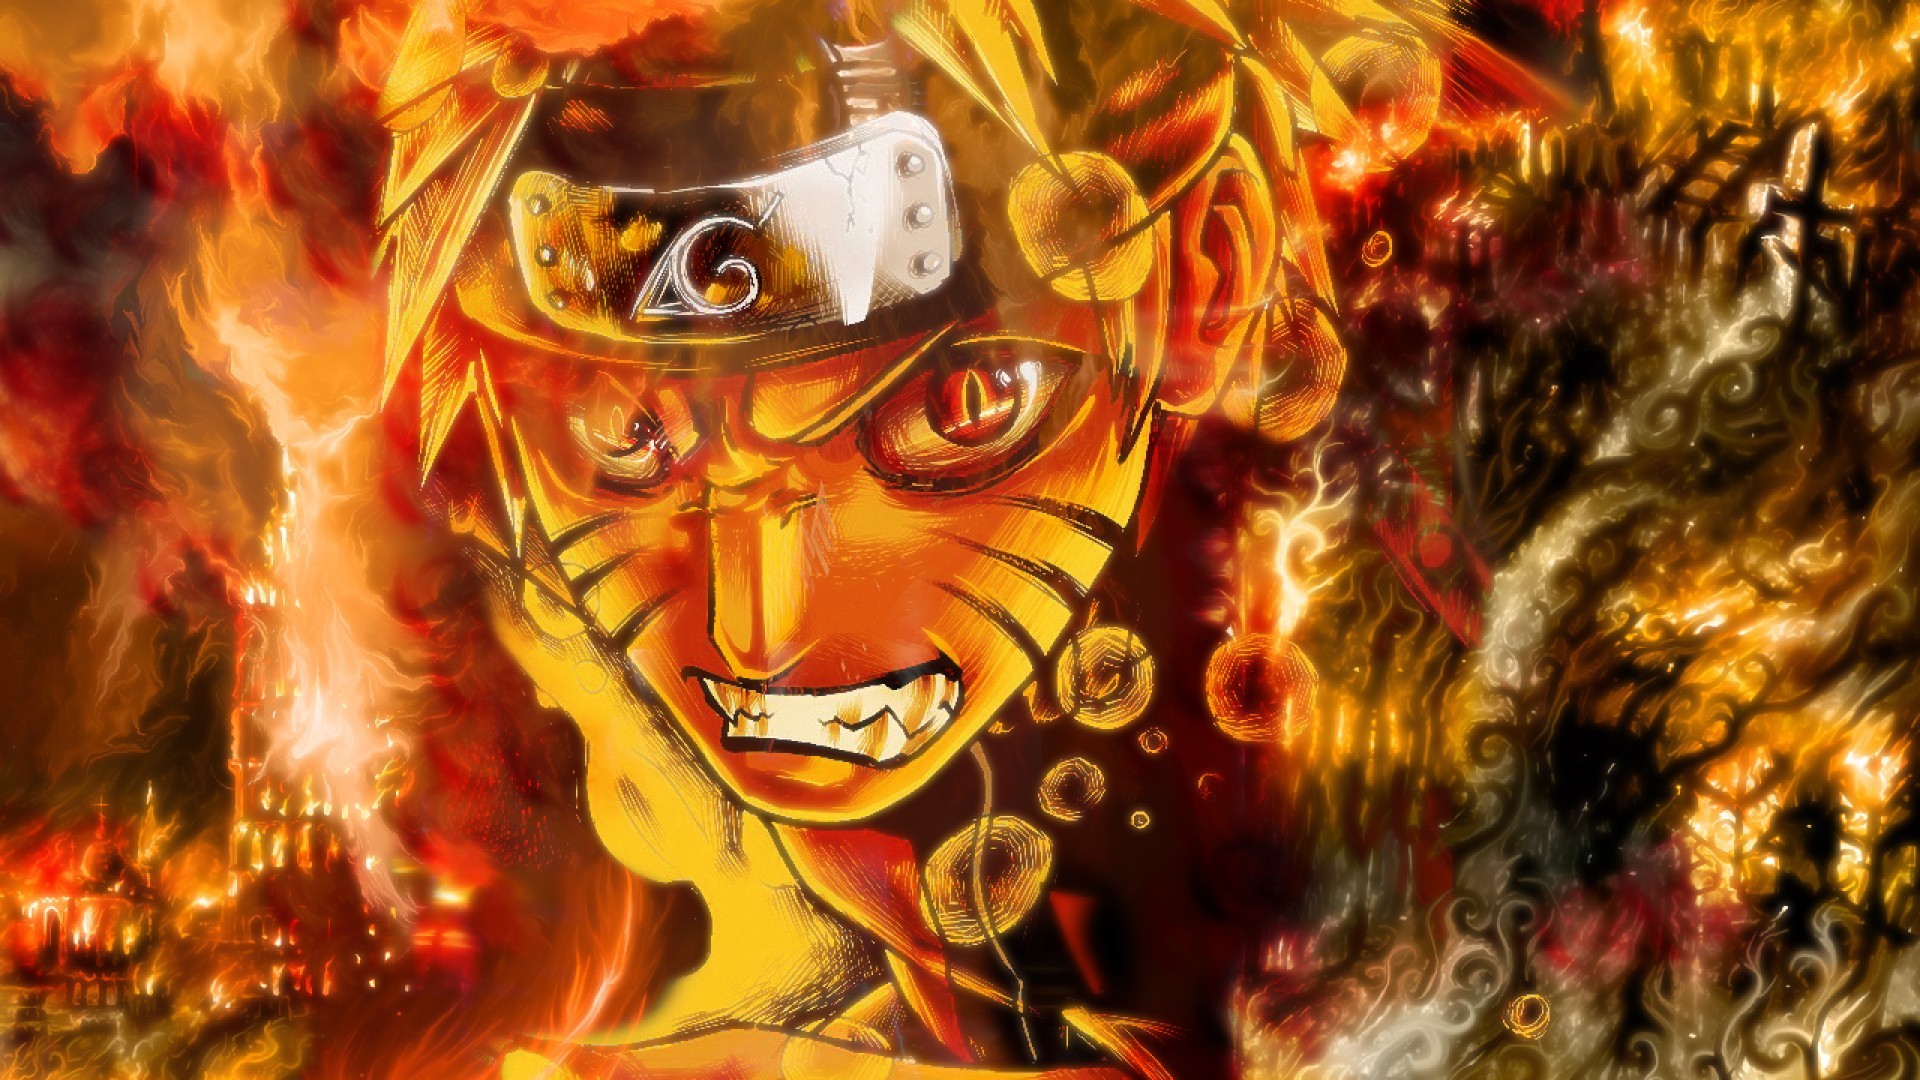 Naruto Wallpaper HD with high-resolution 1920x1080 pixel. You can use this poster wallpaper for your Desktop Computers, Mac Screensavers, Windows Backgrounds, iPhone Wallpapers, Tablet or Android Lock screen and another Mobile device